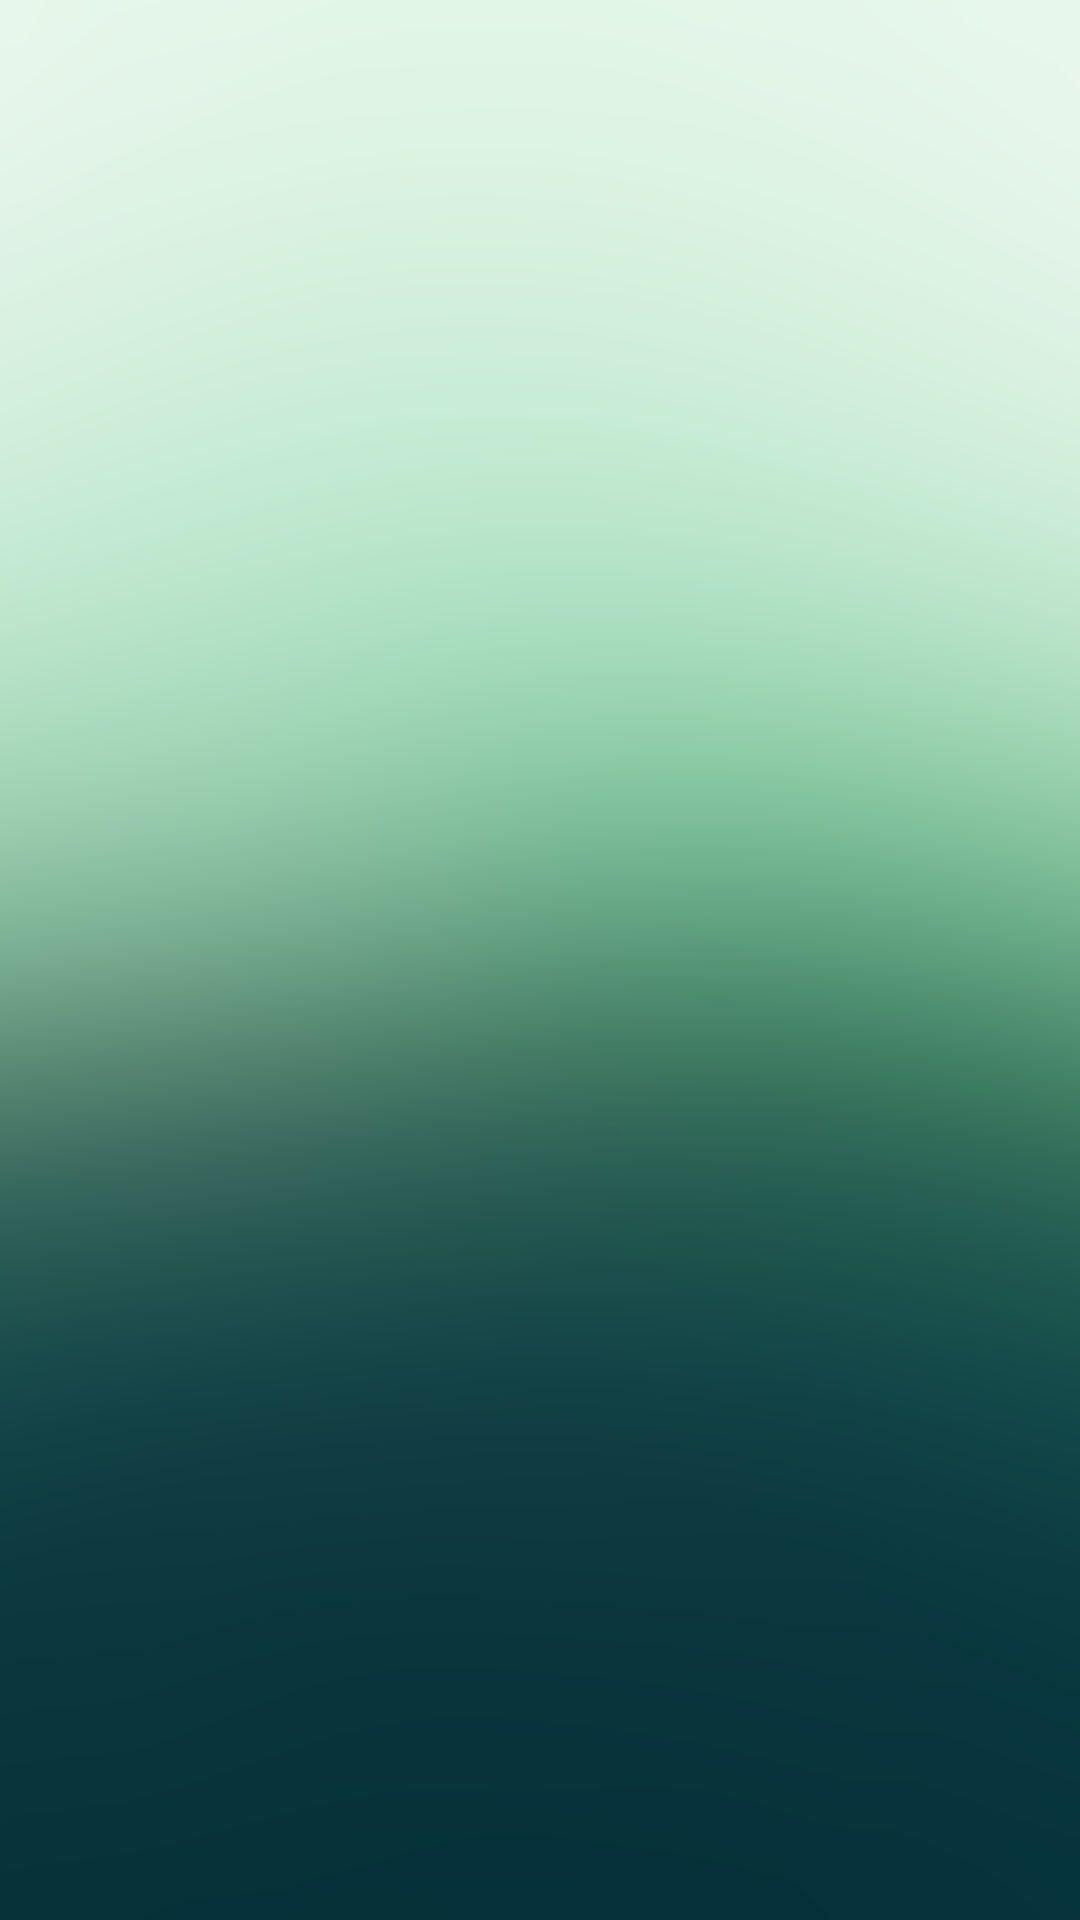 Green Abstract Gradient Wallpapers  HD Wallpapers  ID 24221